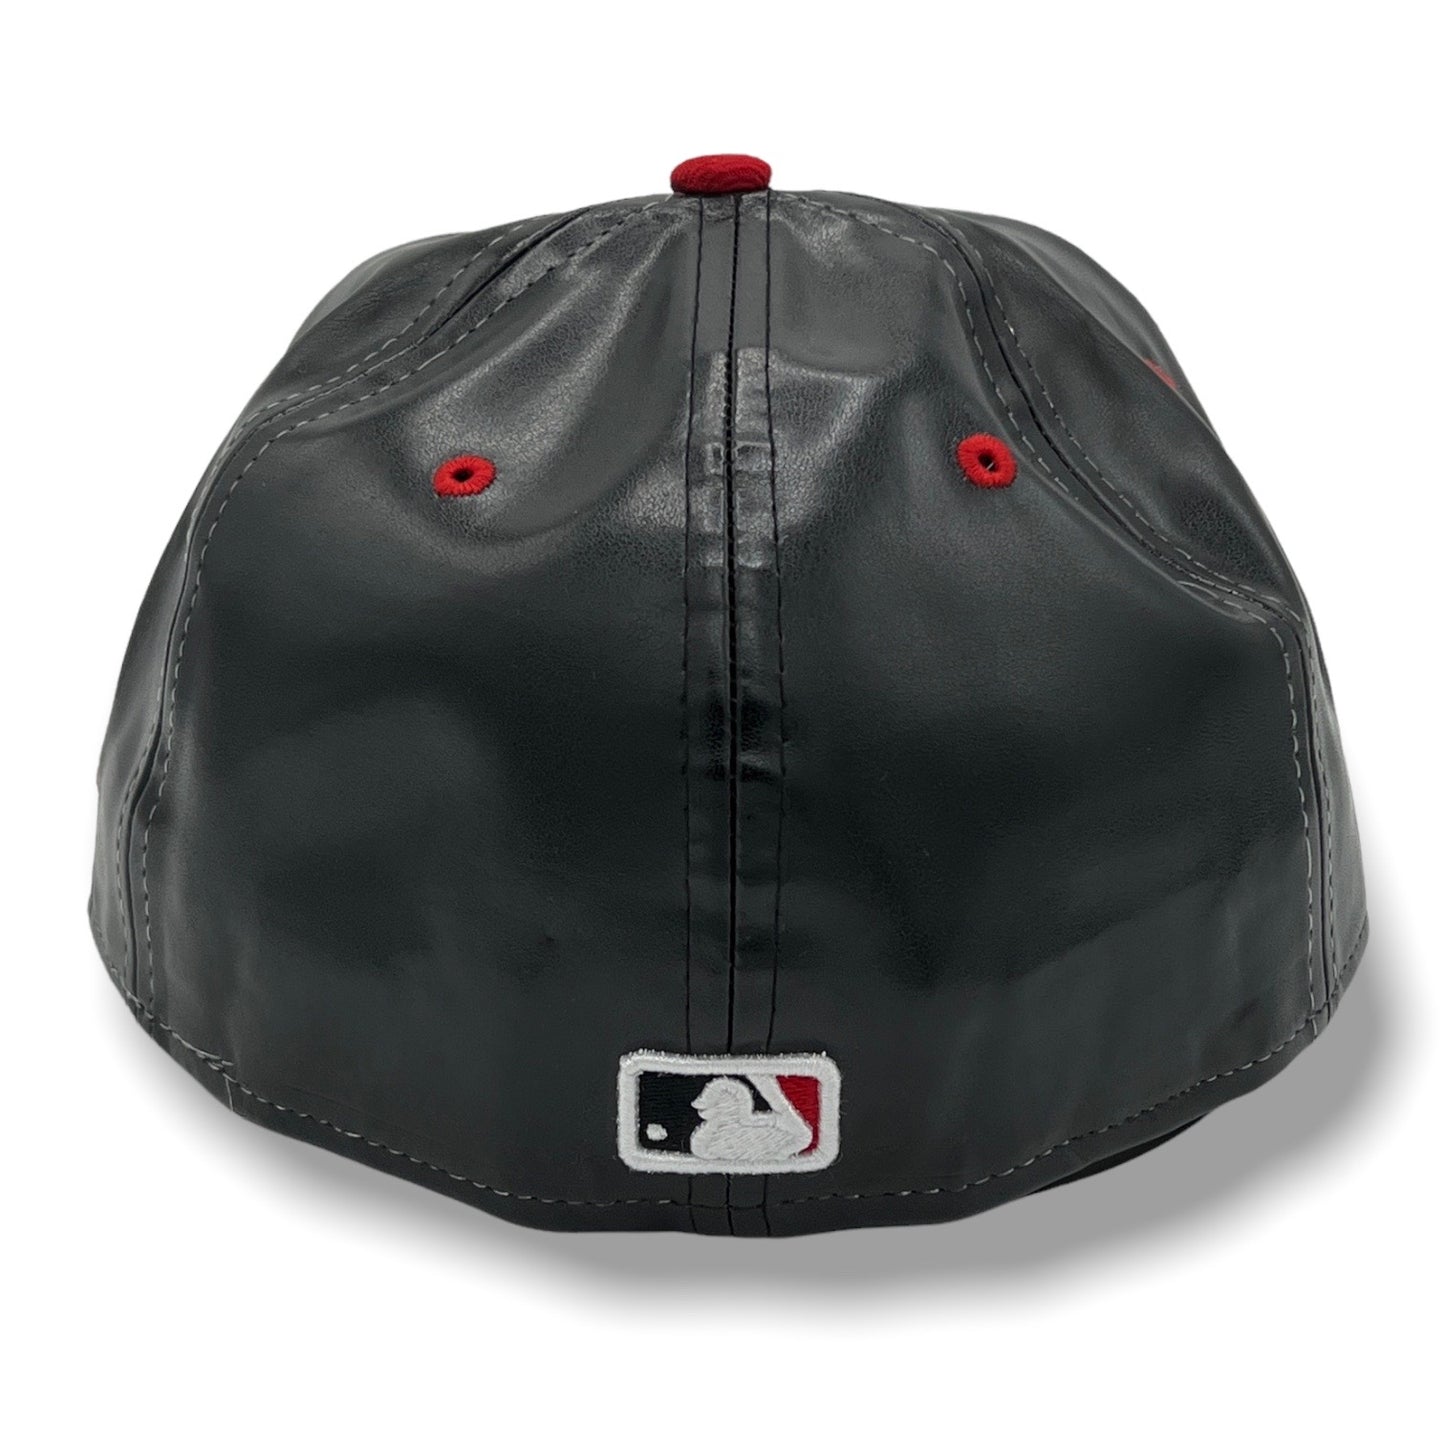 Extremely Rare Astros New Era Fitted  Black and Red Vintage Hat